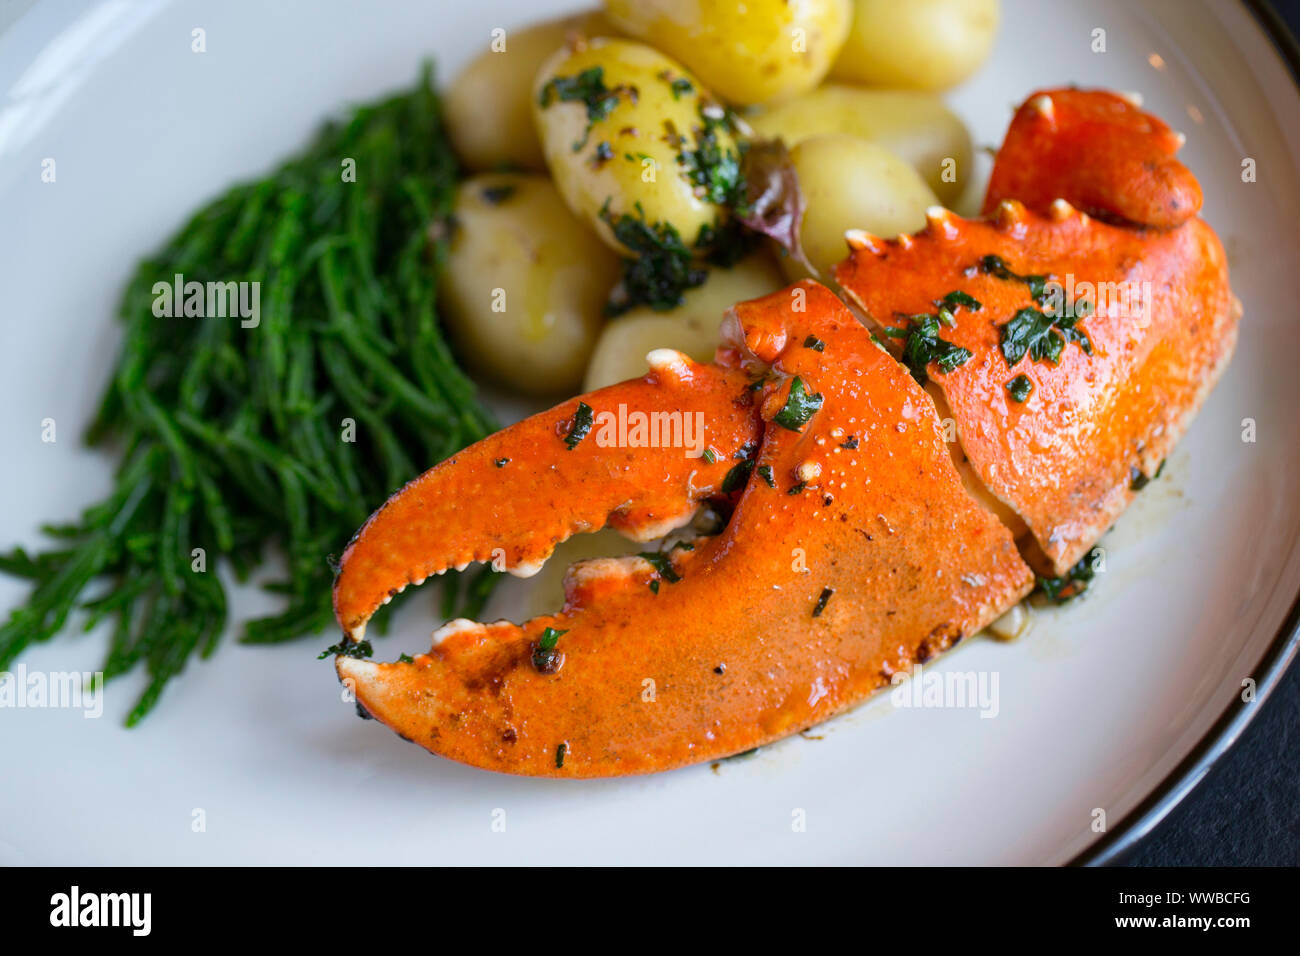 A boiled, cooked lobster claw from a common lobster, Homarus gammarus, that has been served with a butter, garlic and parsley sauce and boiled potatoe Stock Photo